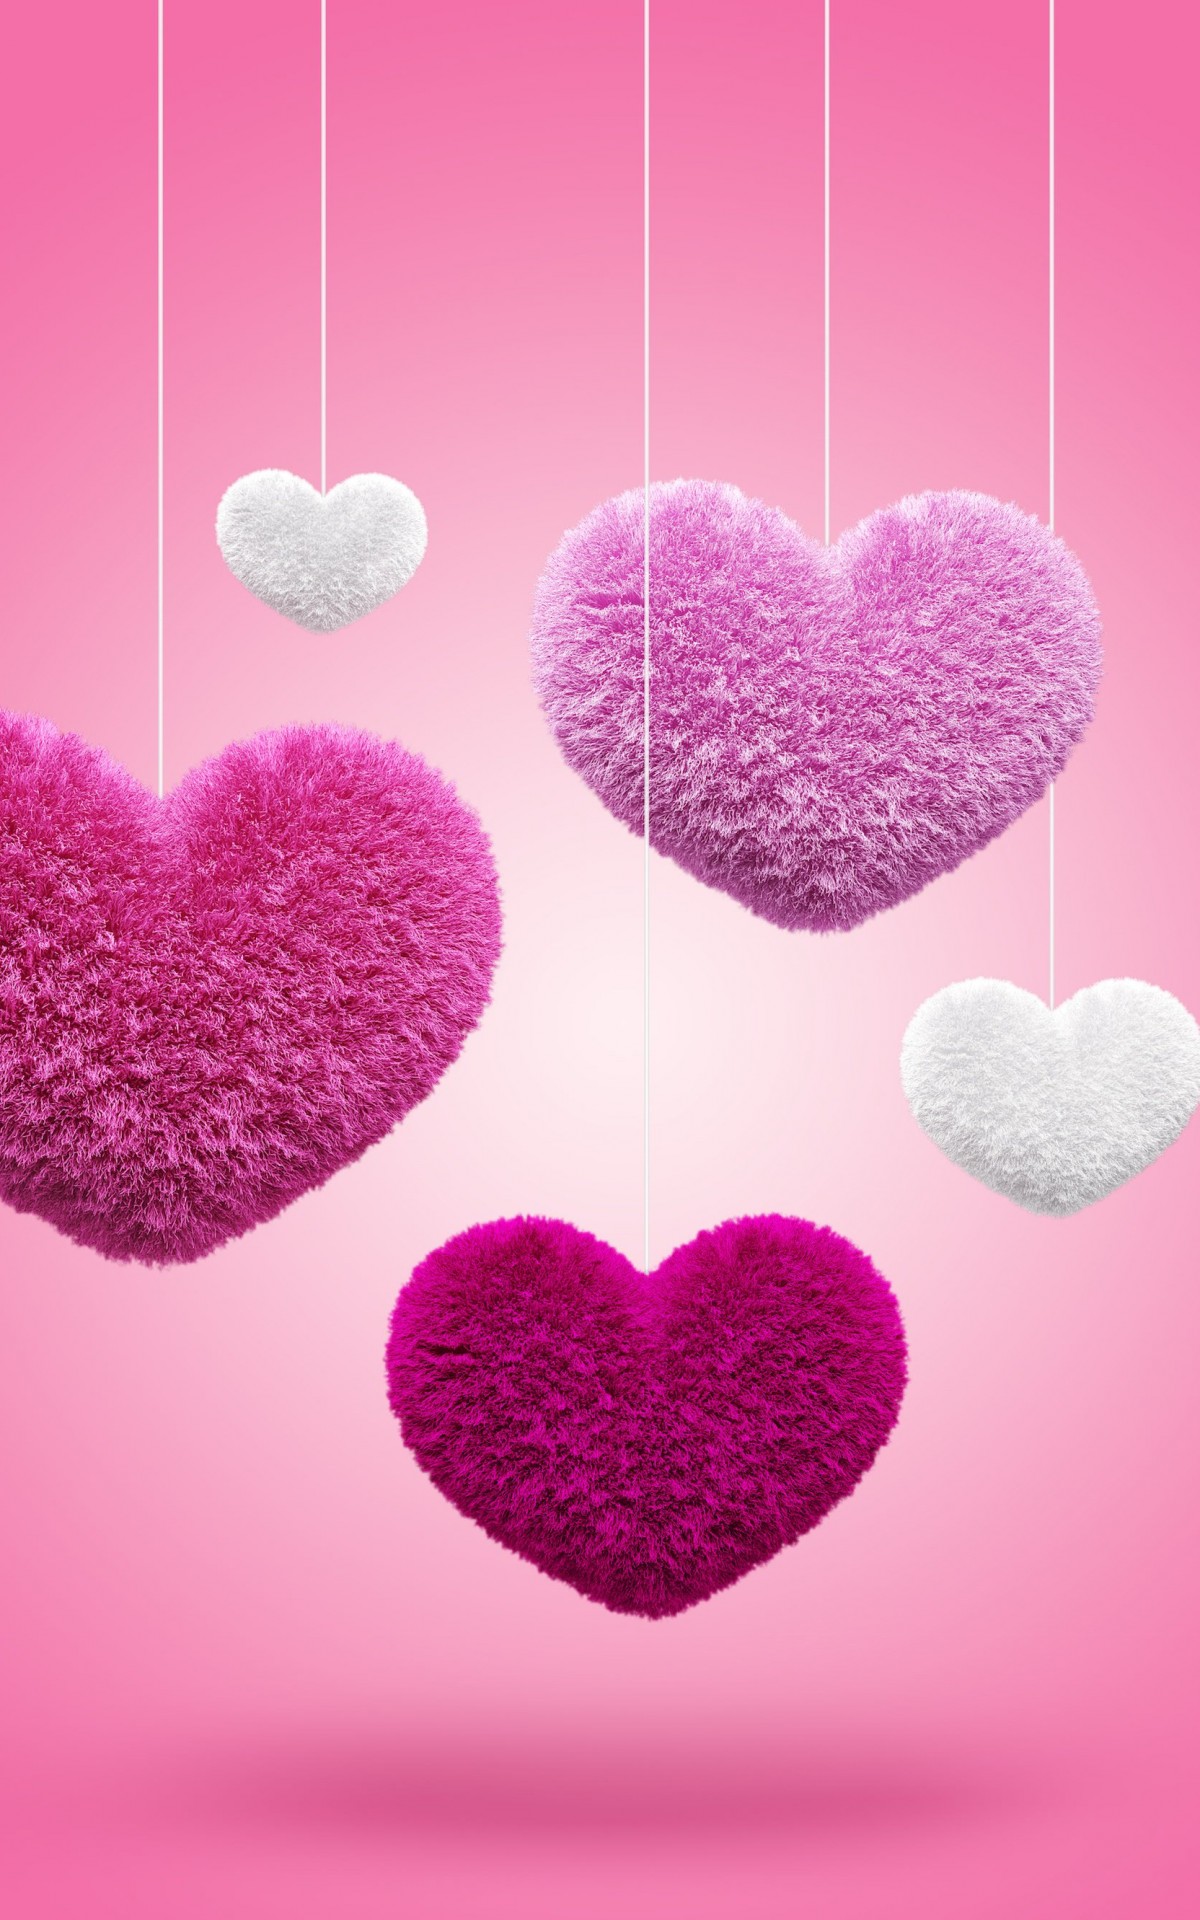 Fluffy Hearts Wallpaper for Amazon Kindle Fire HDX